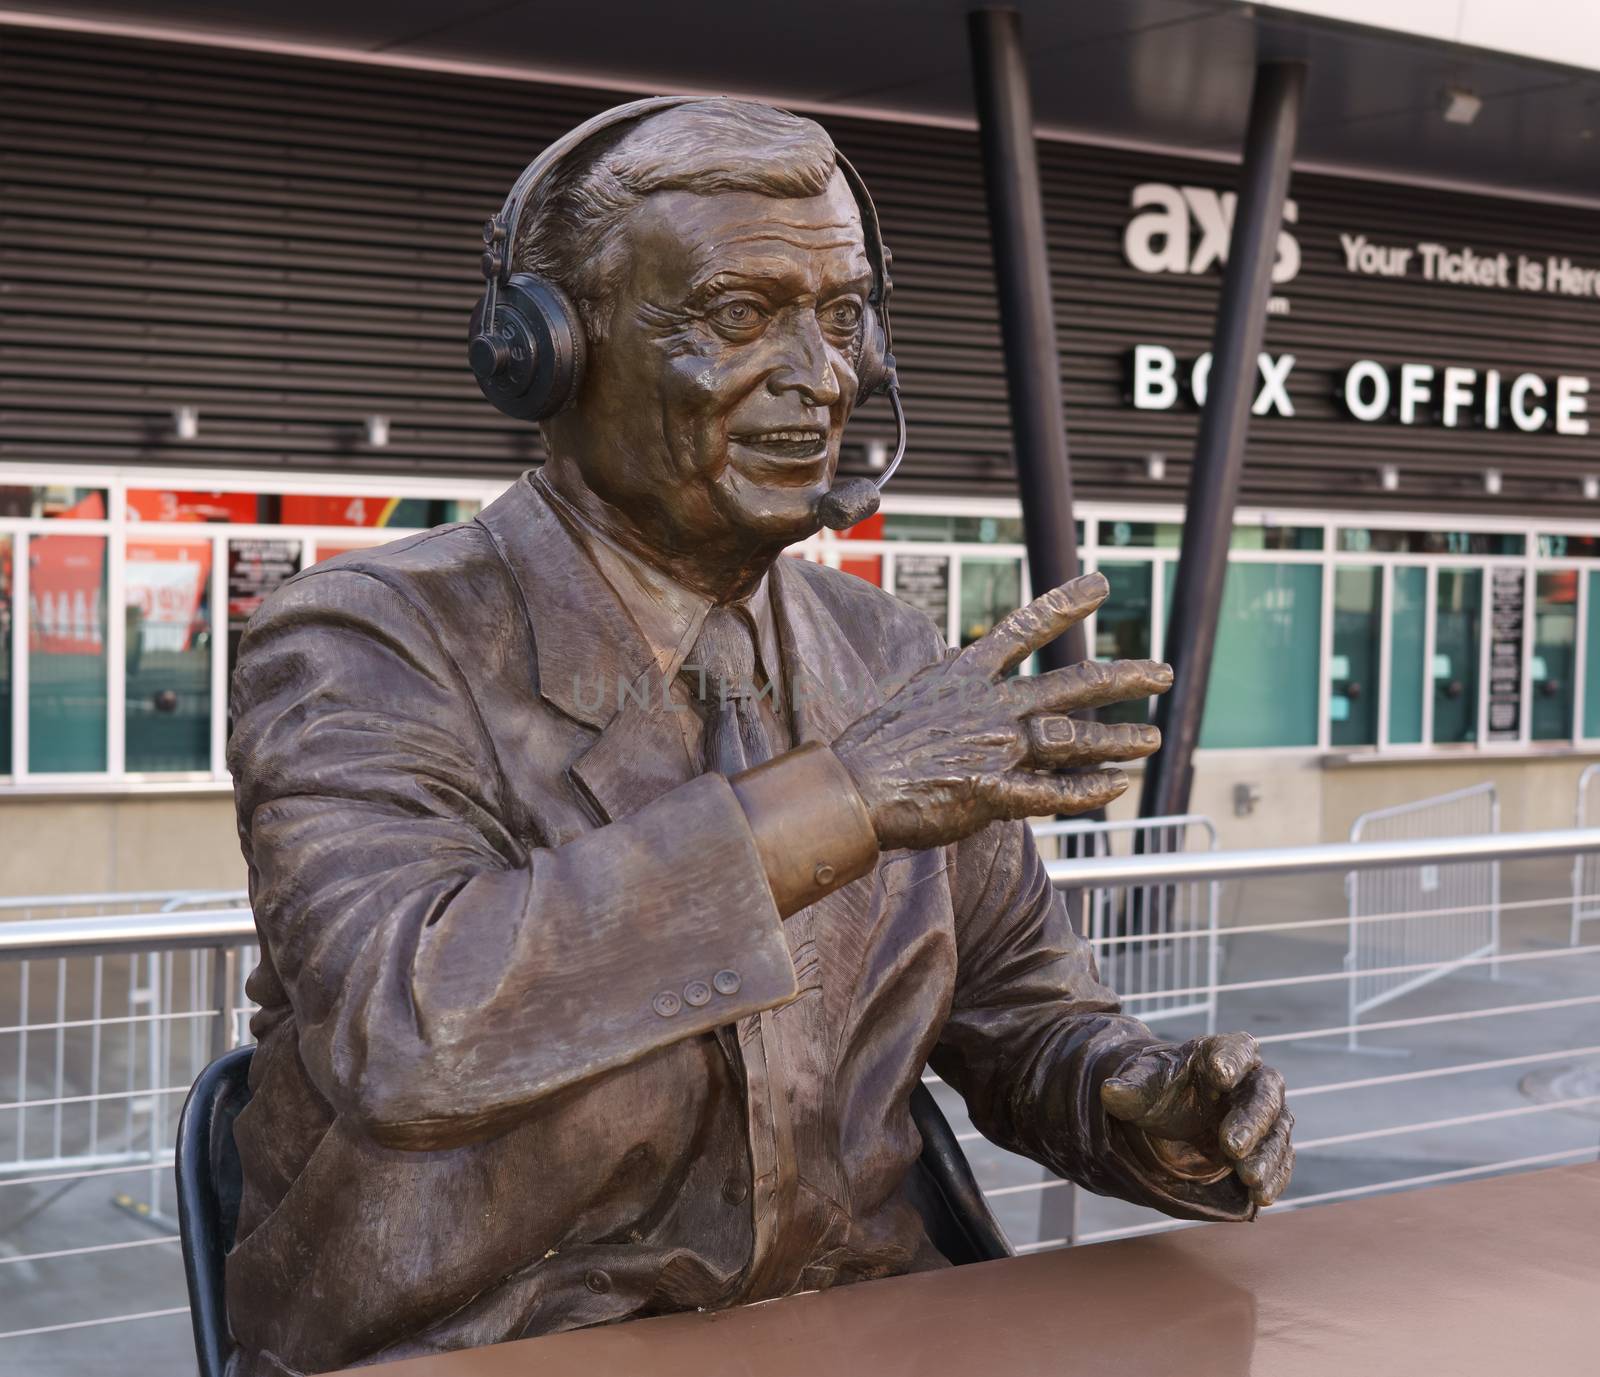 LOS ANGELES, CA/USA - December 6, 2015: 2015: Chick Hearn statue at Staples Center. Chick Hearn was an American sportscaster and long-time play-by-play announcer for the Los Angeles Lakers.